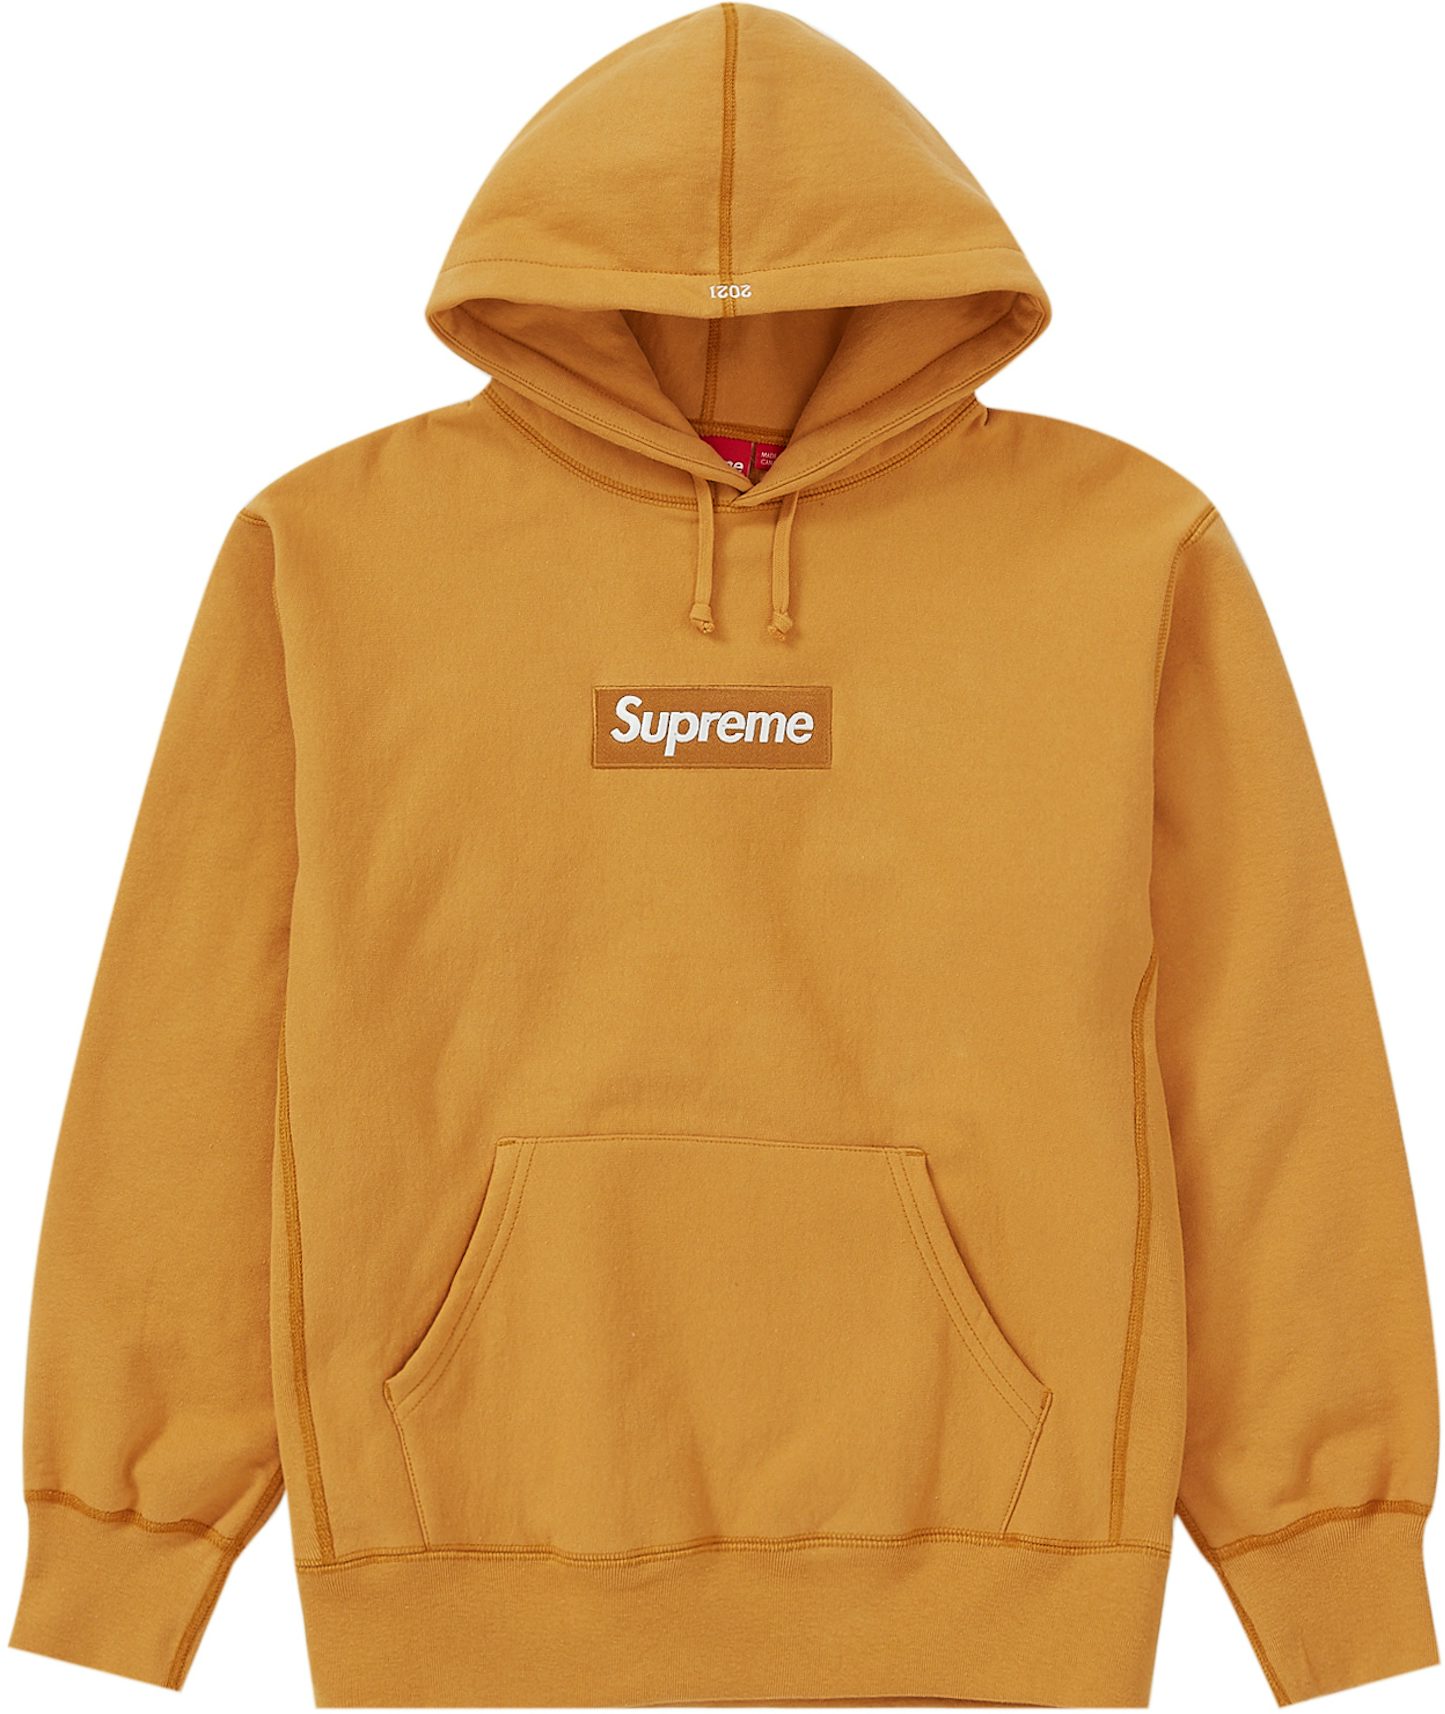 Supreme Box Logo Hoodie FW 21 - Small - Washed Navy